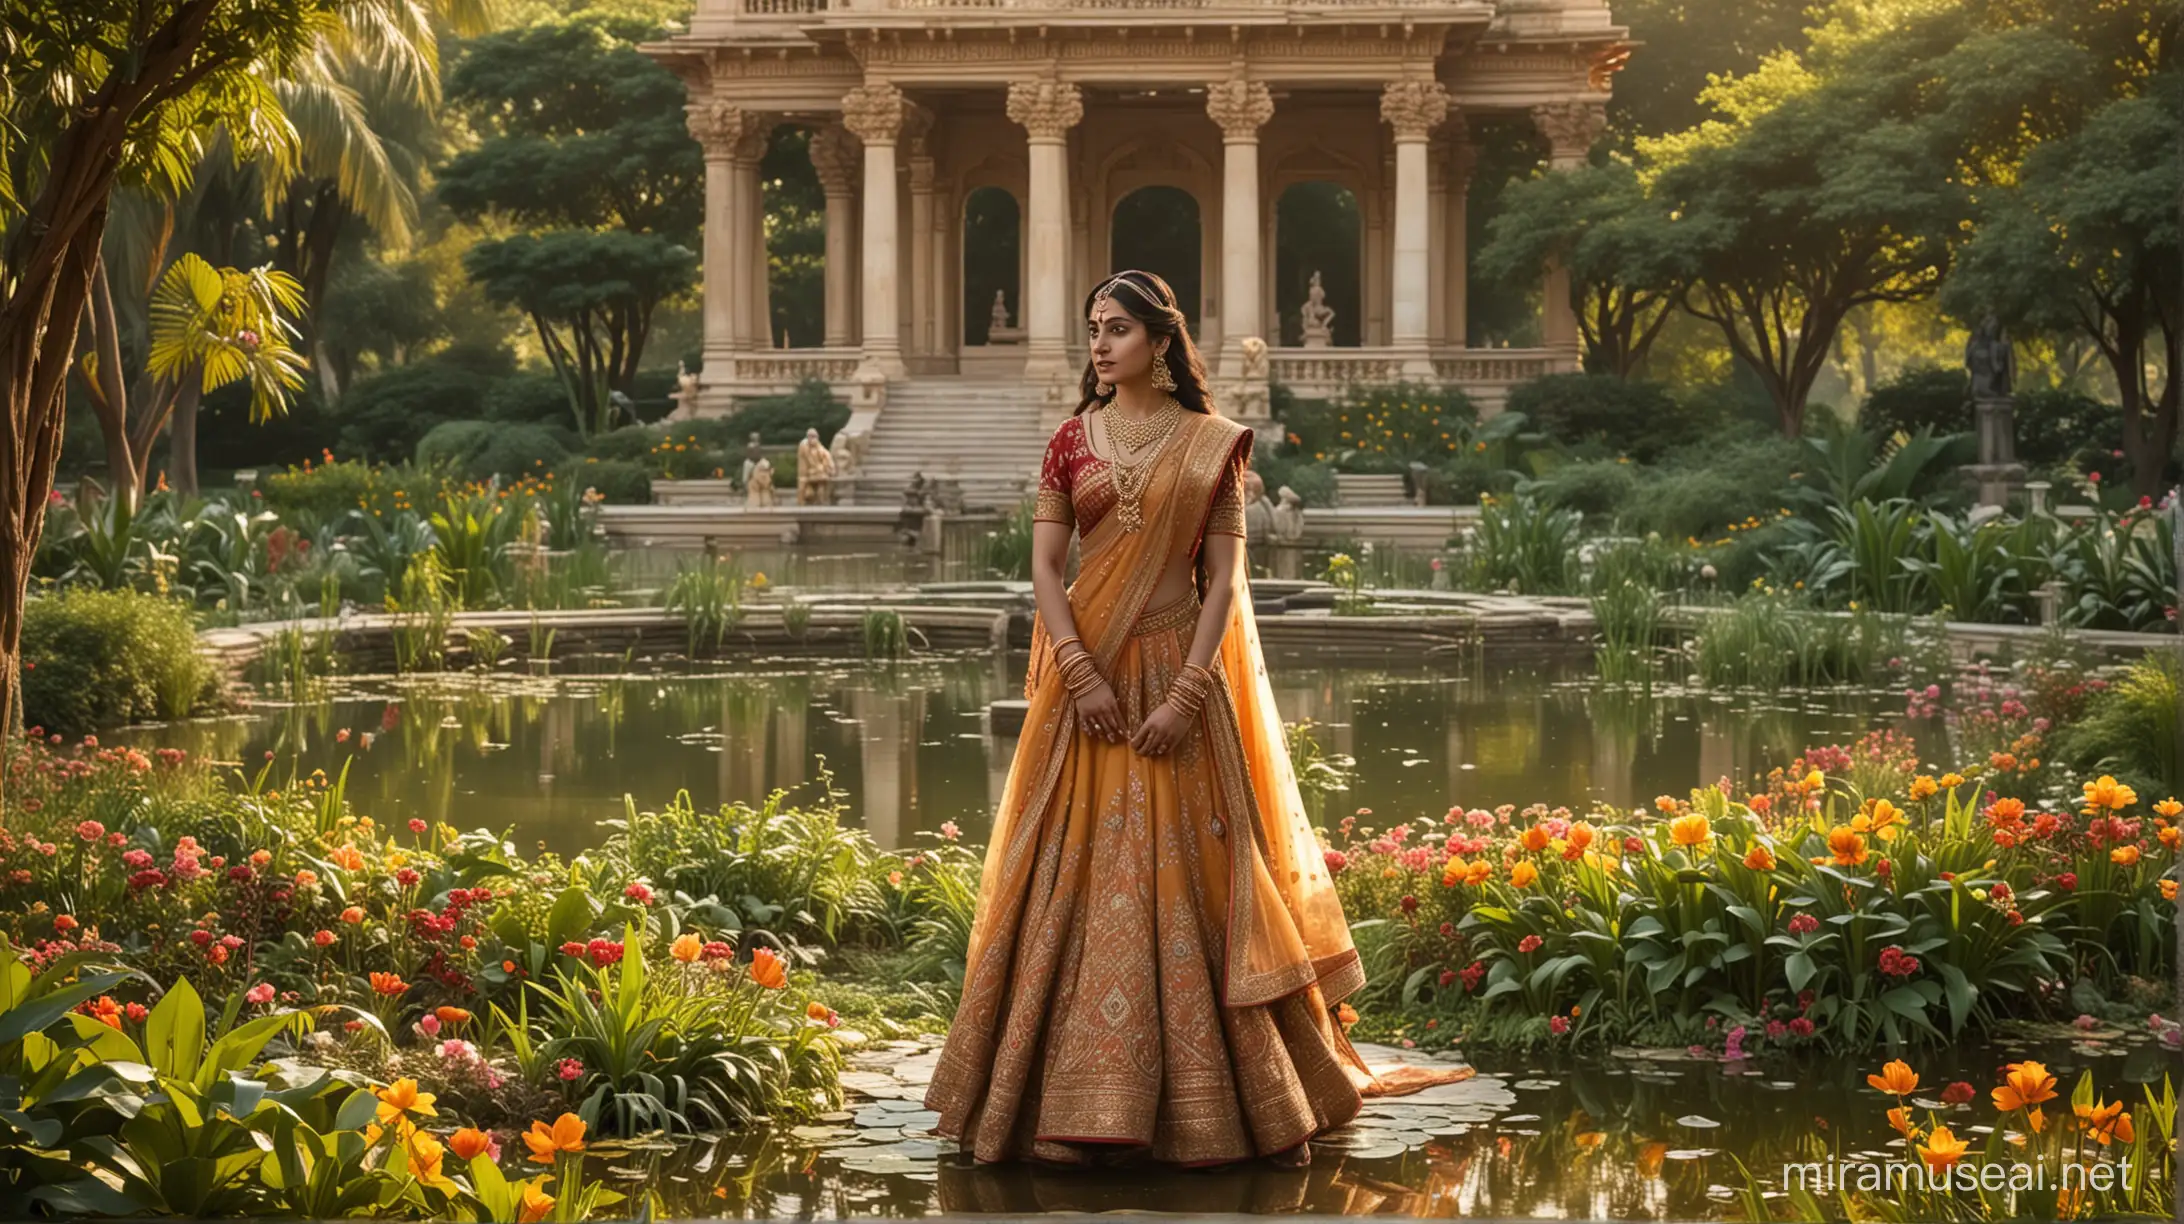 A breathtakingly realistic scene featuring Lord Krishna and Princess Draupadi in a lush, vibrant garden. The princess is resplendent in her intricate attire adorned with gold and gemstones, her elegance standing out against the rich, colorful foliage. The serene pond and majestic palace in the background add an air of royalty and grandeur. Despite the beauty of their surroundings, Krishna's somber expression betrays a sense of sadness and contemplation, creating a poignant and melancholic mood that contrasts with the visual splendor of the garden.